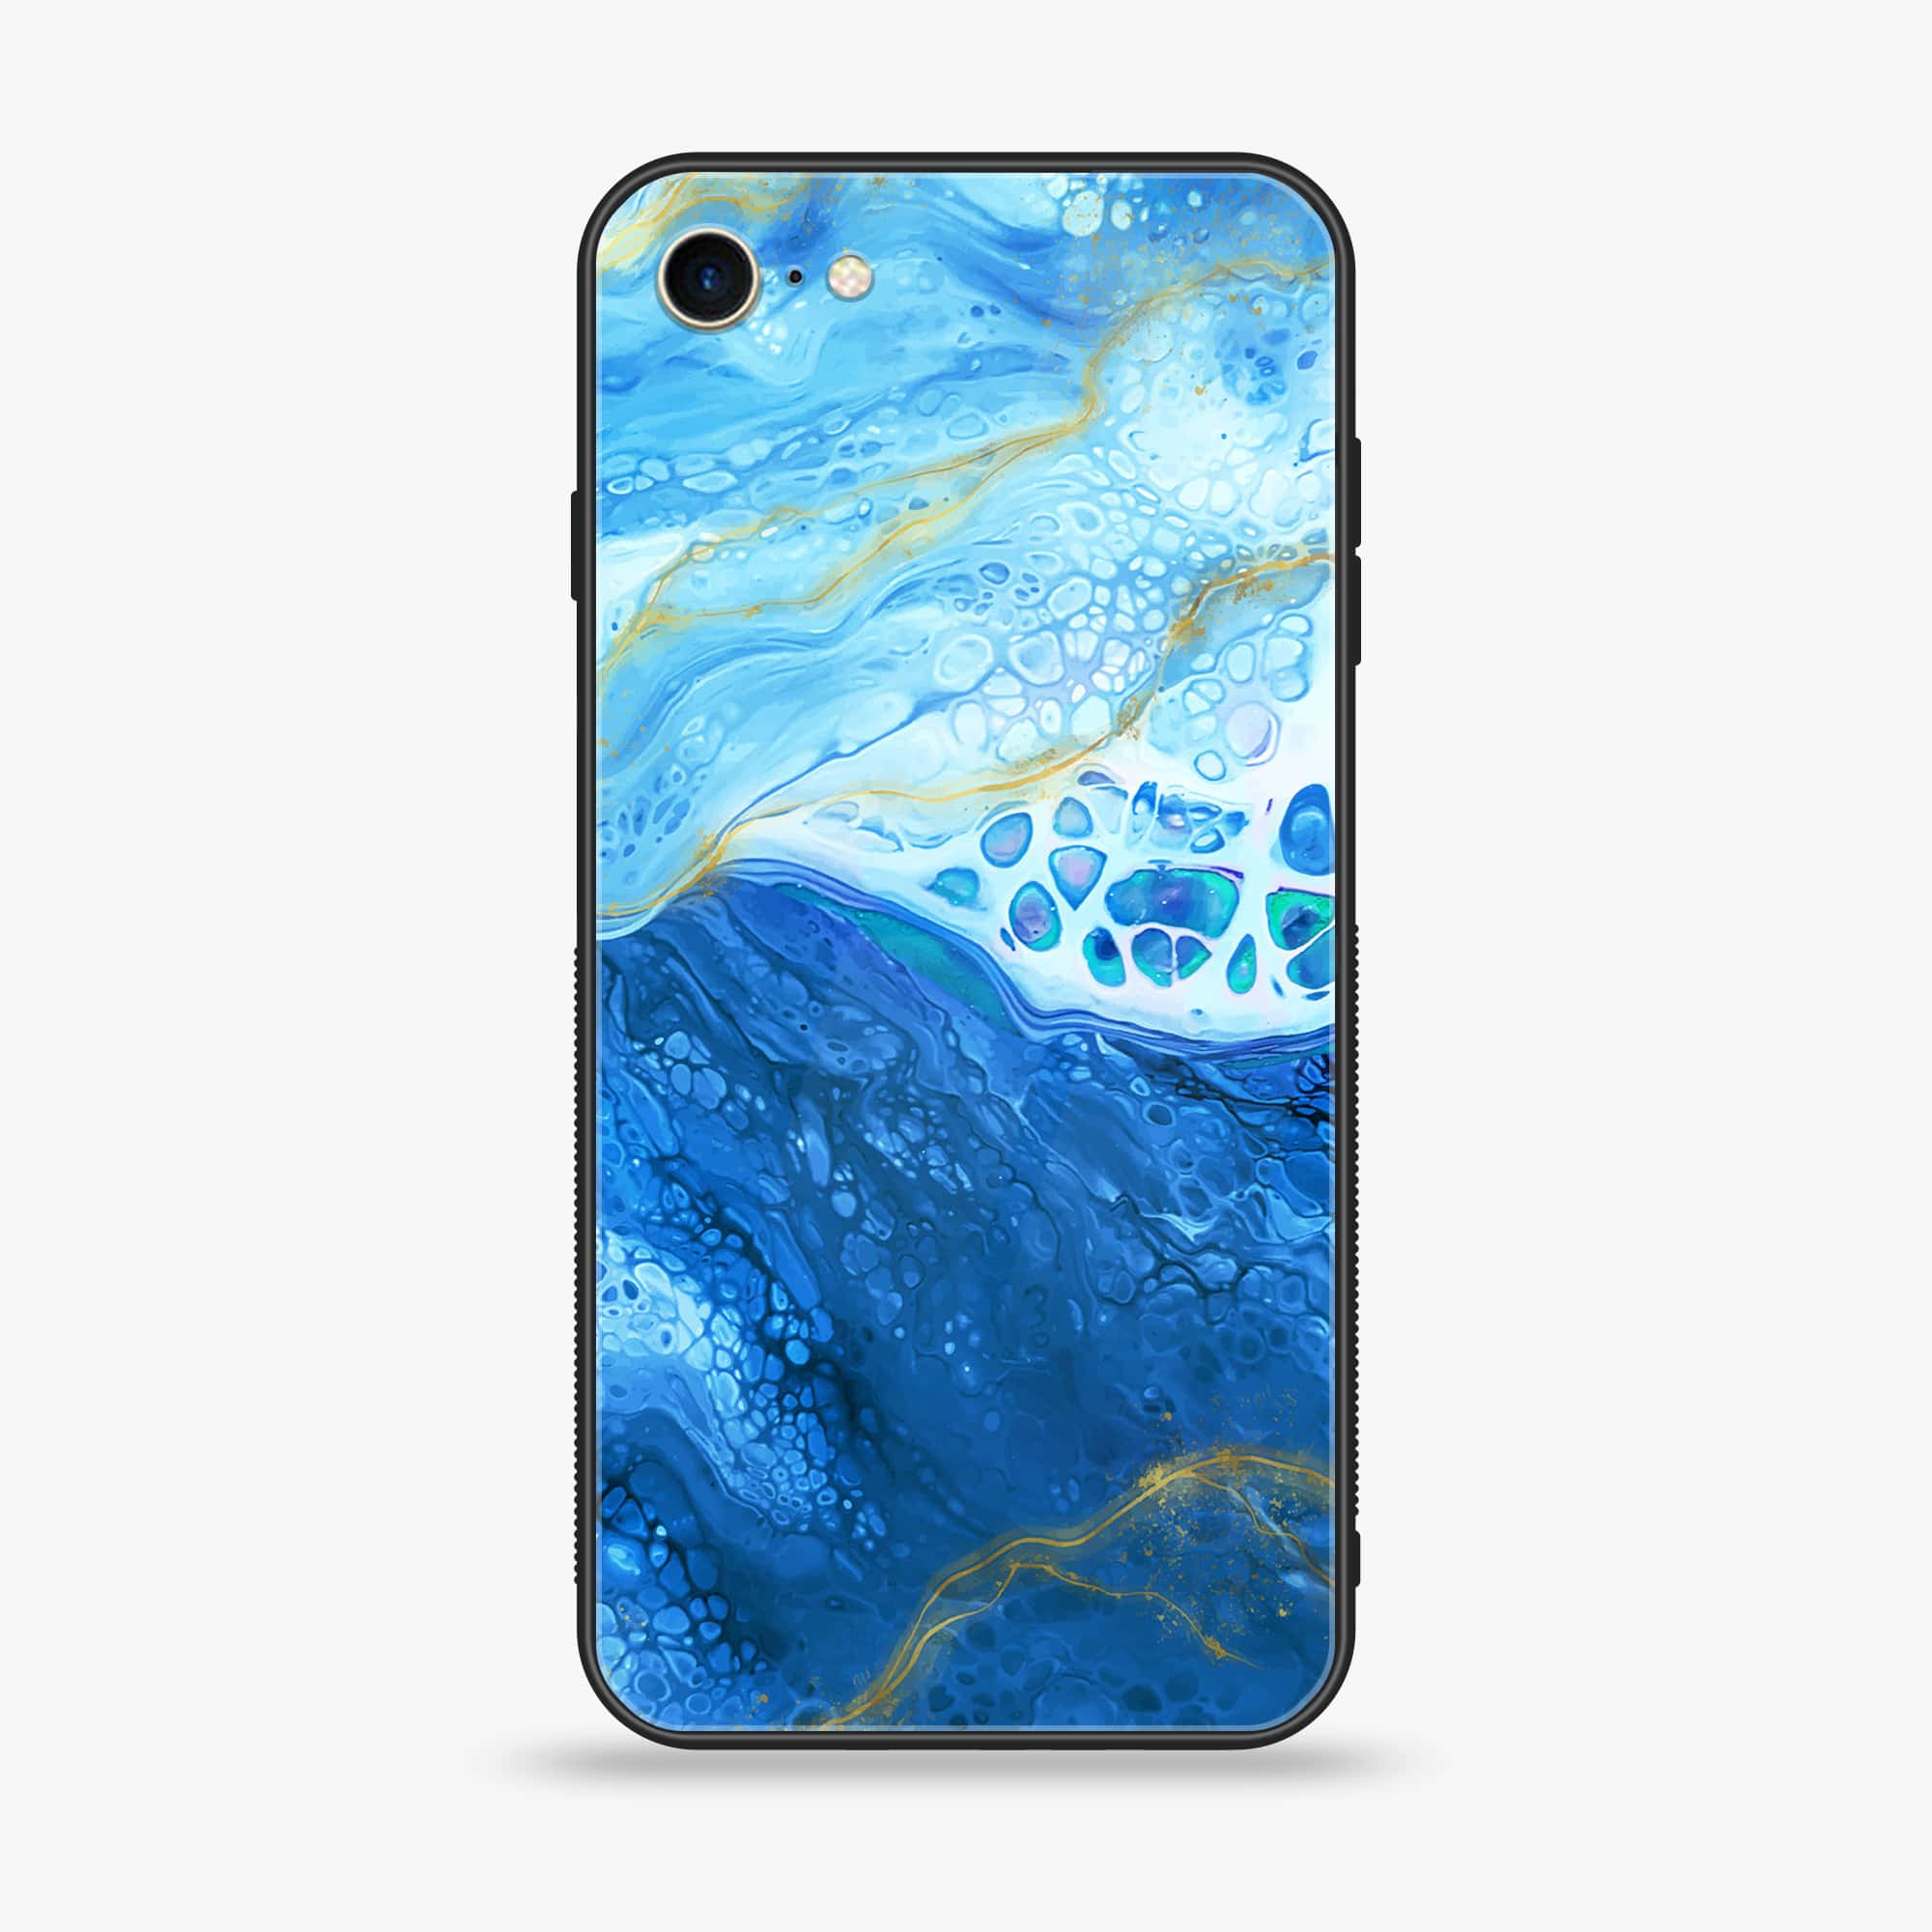 iPhone 7 - Blue Marble Series V 2.0 - Premium Printed Glass soft Bumper shock Proof Case